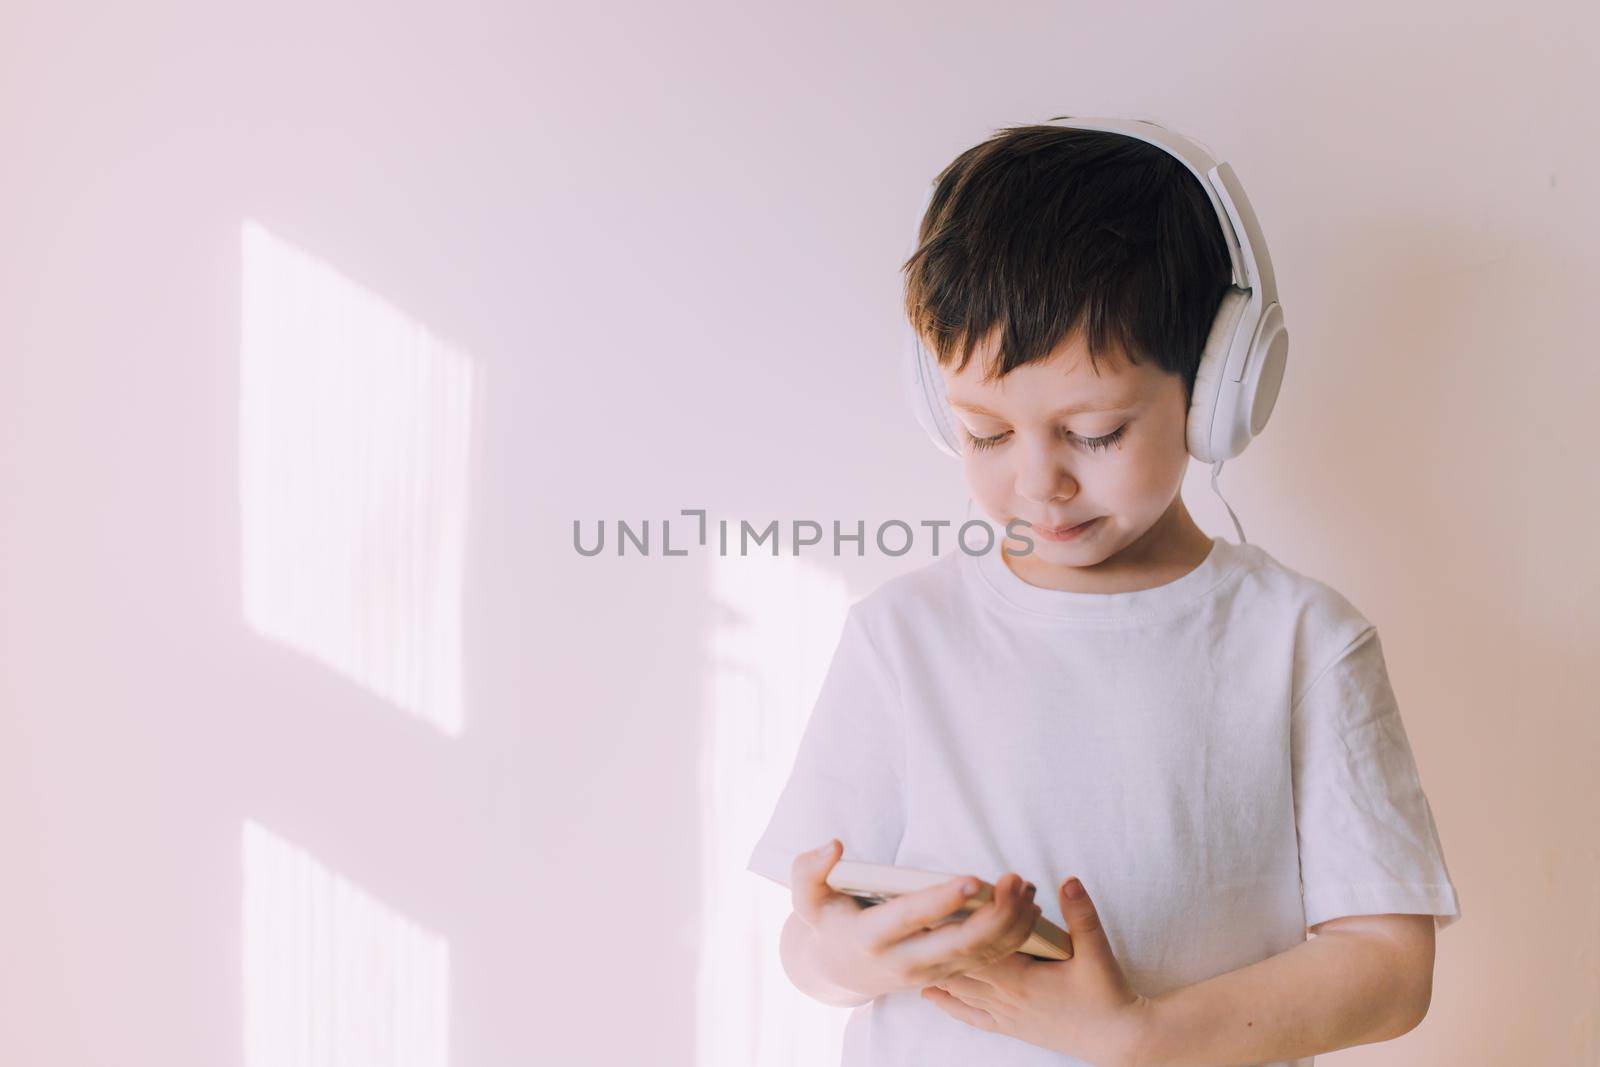 The boy listens to music with lifestyle headphones . Modern technologies. Kids and gadgets. Music for children. Modern children. Smartphones in children. Copy space. White background.